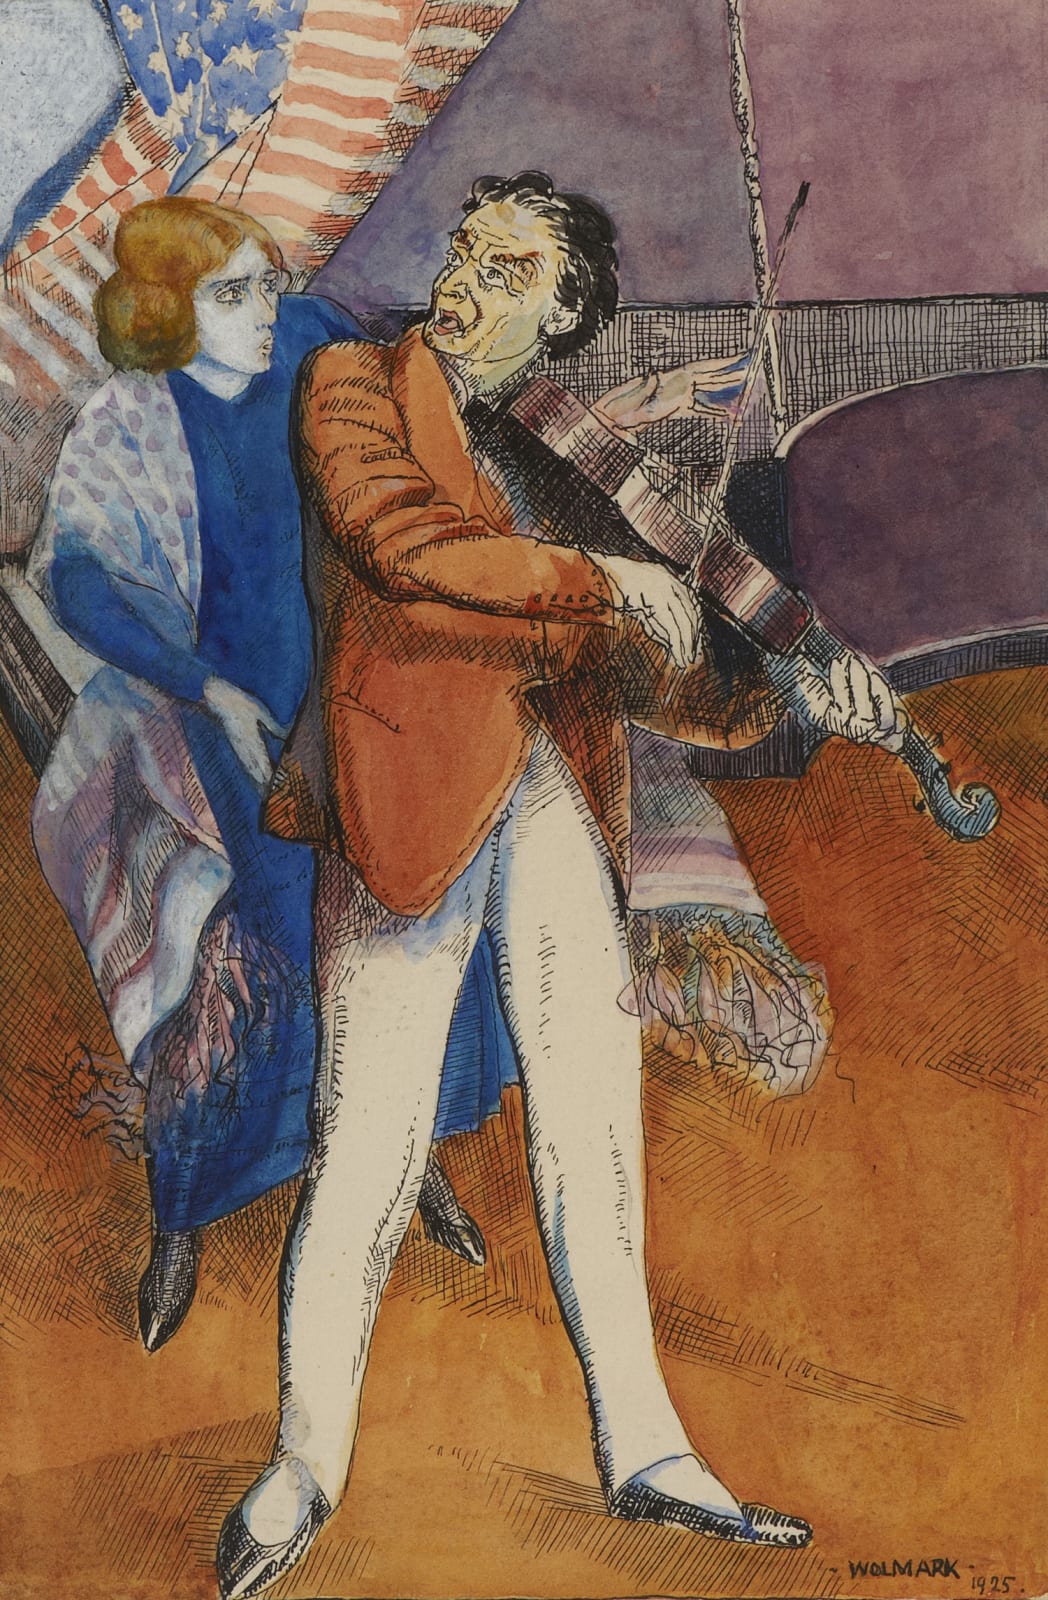 Alfred Wolmark (1877-1961) The Broken String - The Melting Pot (Vol. 12 from Fourteen Illustrations to the works of Israel Zangwill) 1925 Watercolour, pen and ink on paper 20 x 13.5 cm Ben Uri Collection © Alfred Wolmark estate To see and discover more about this artist click here